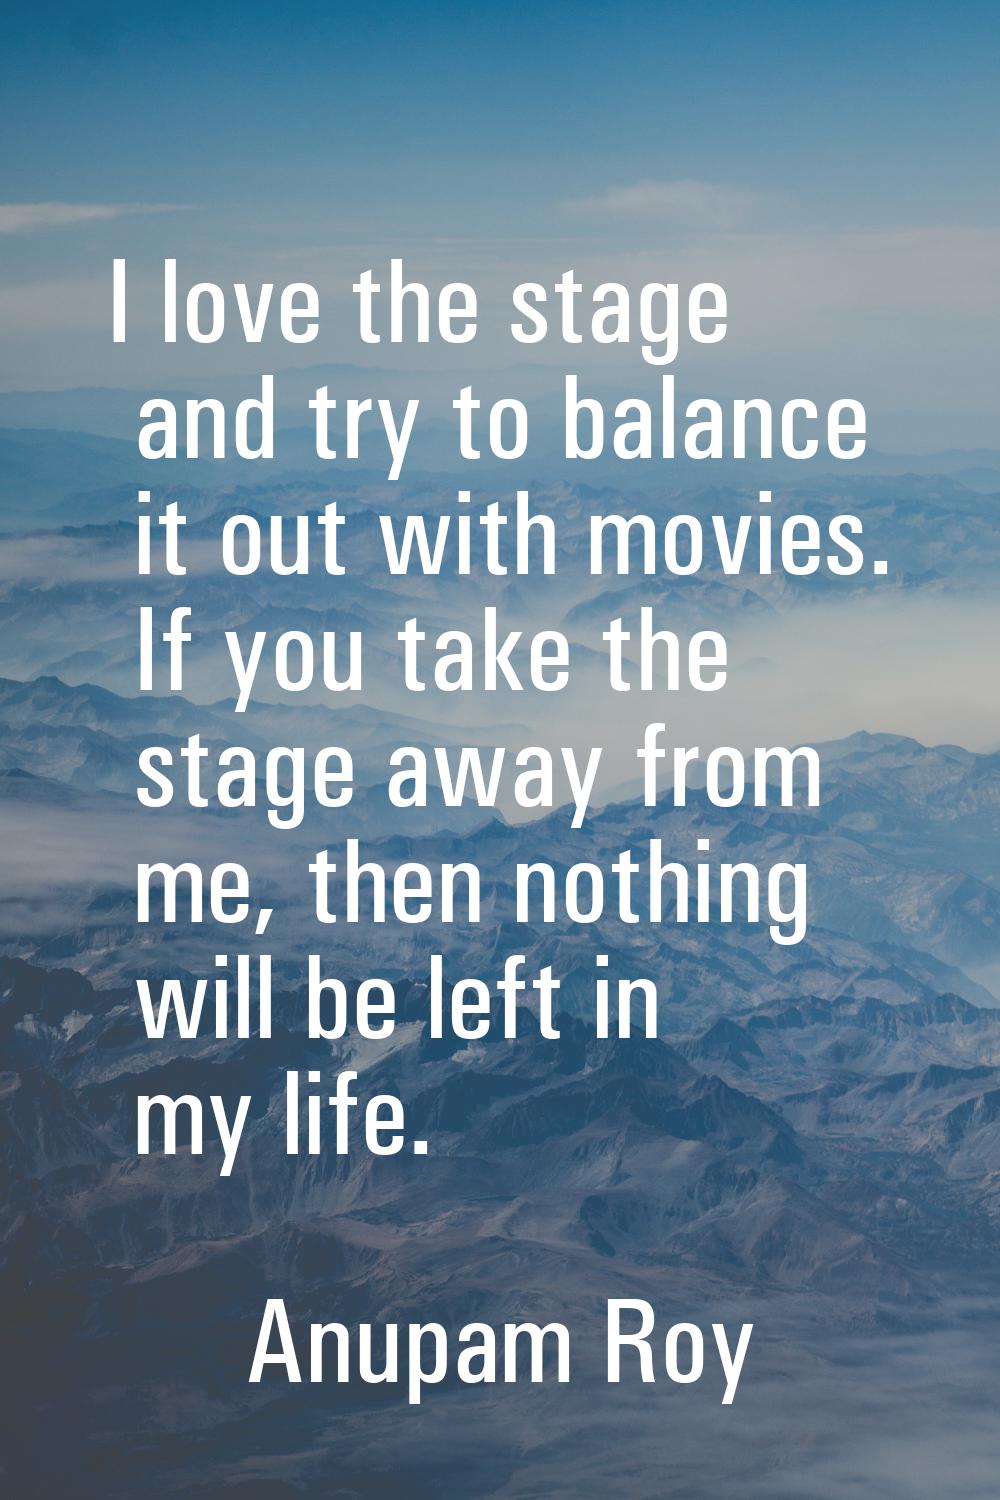 I love the stage and try to balance it out with movies. If you take the stage away from me, then no